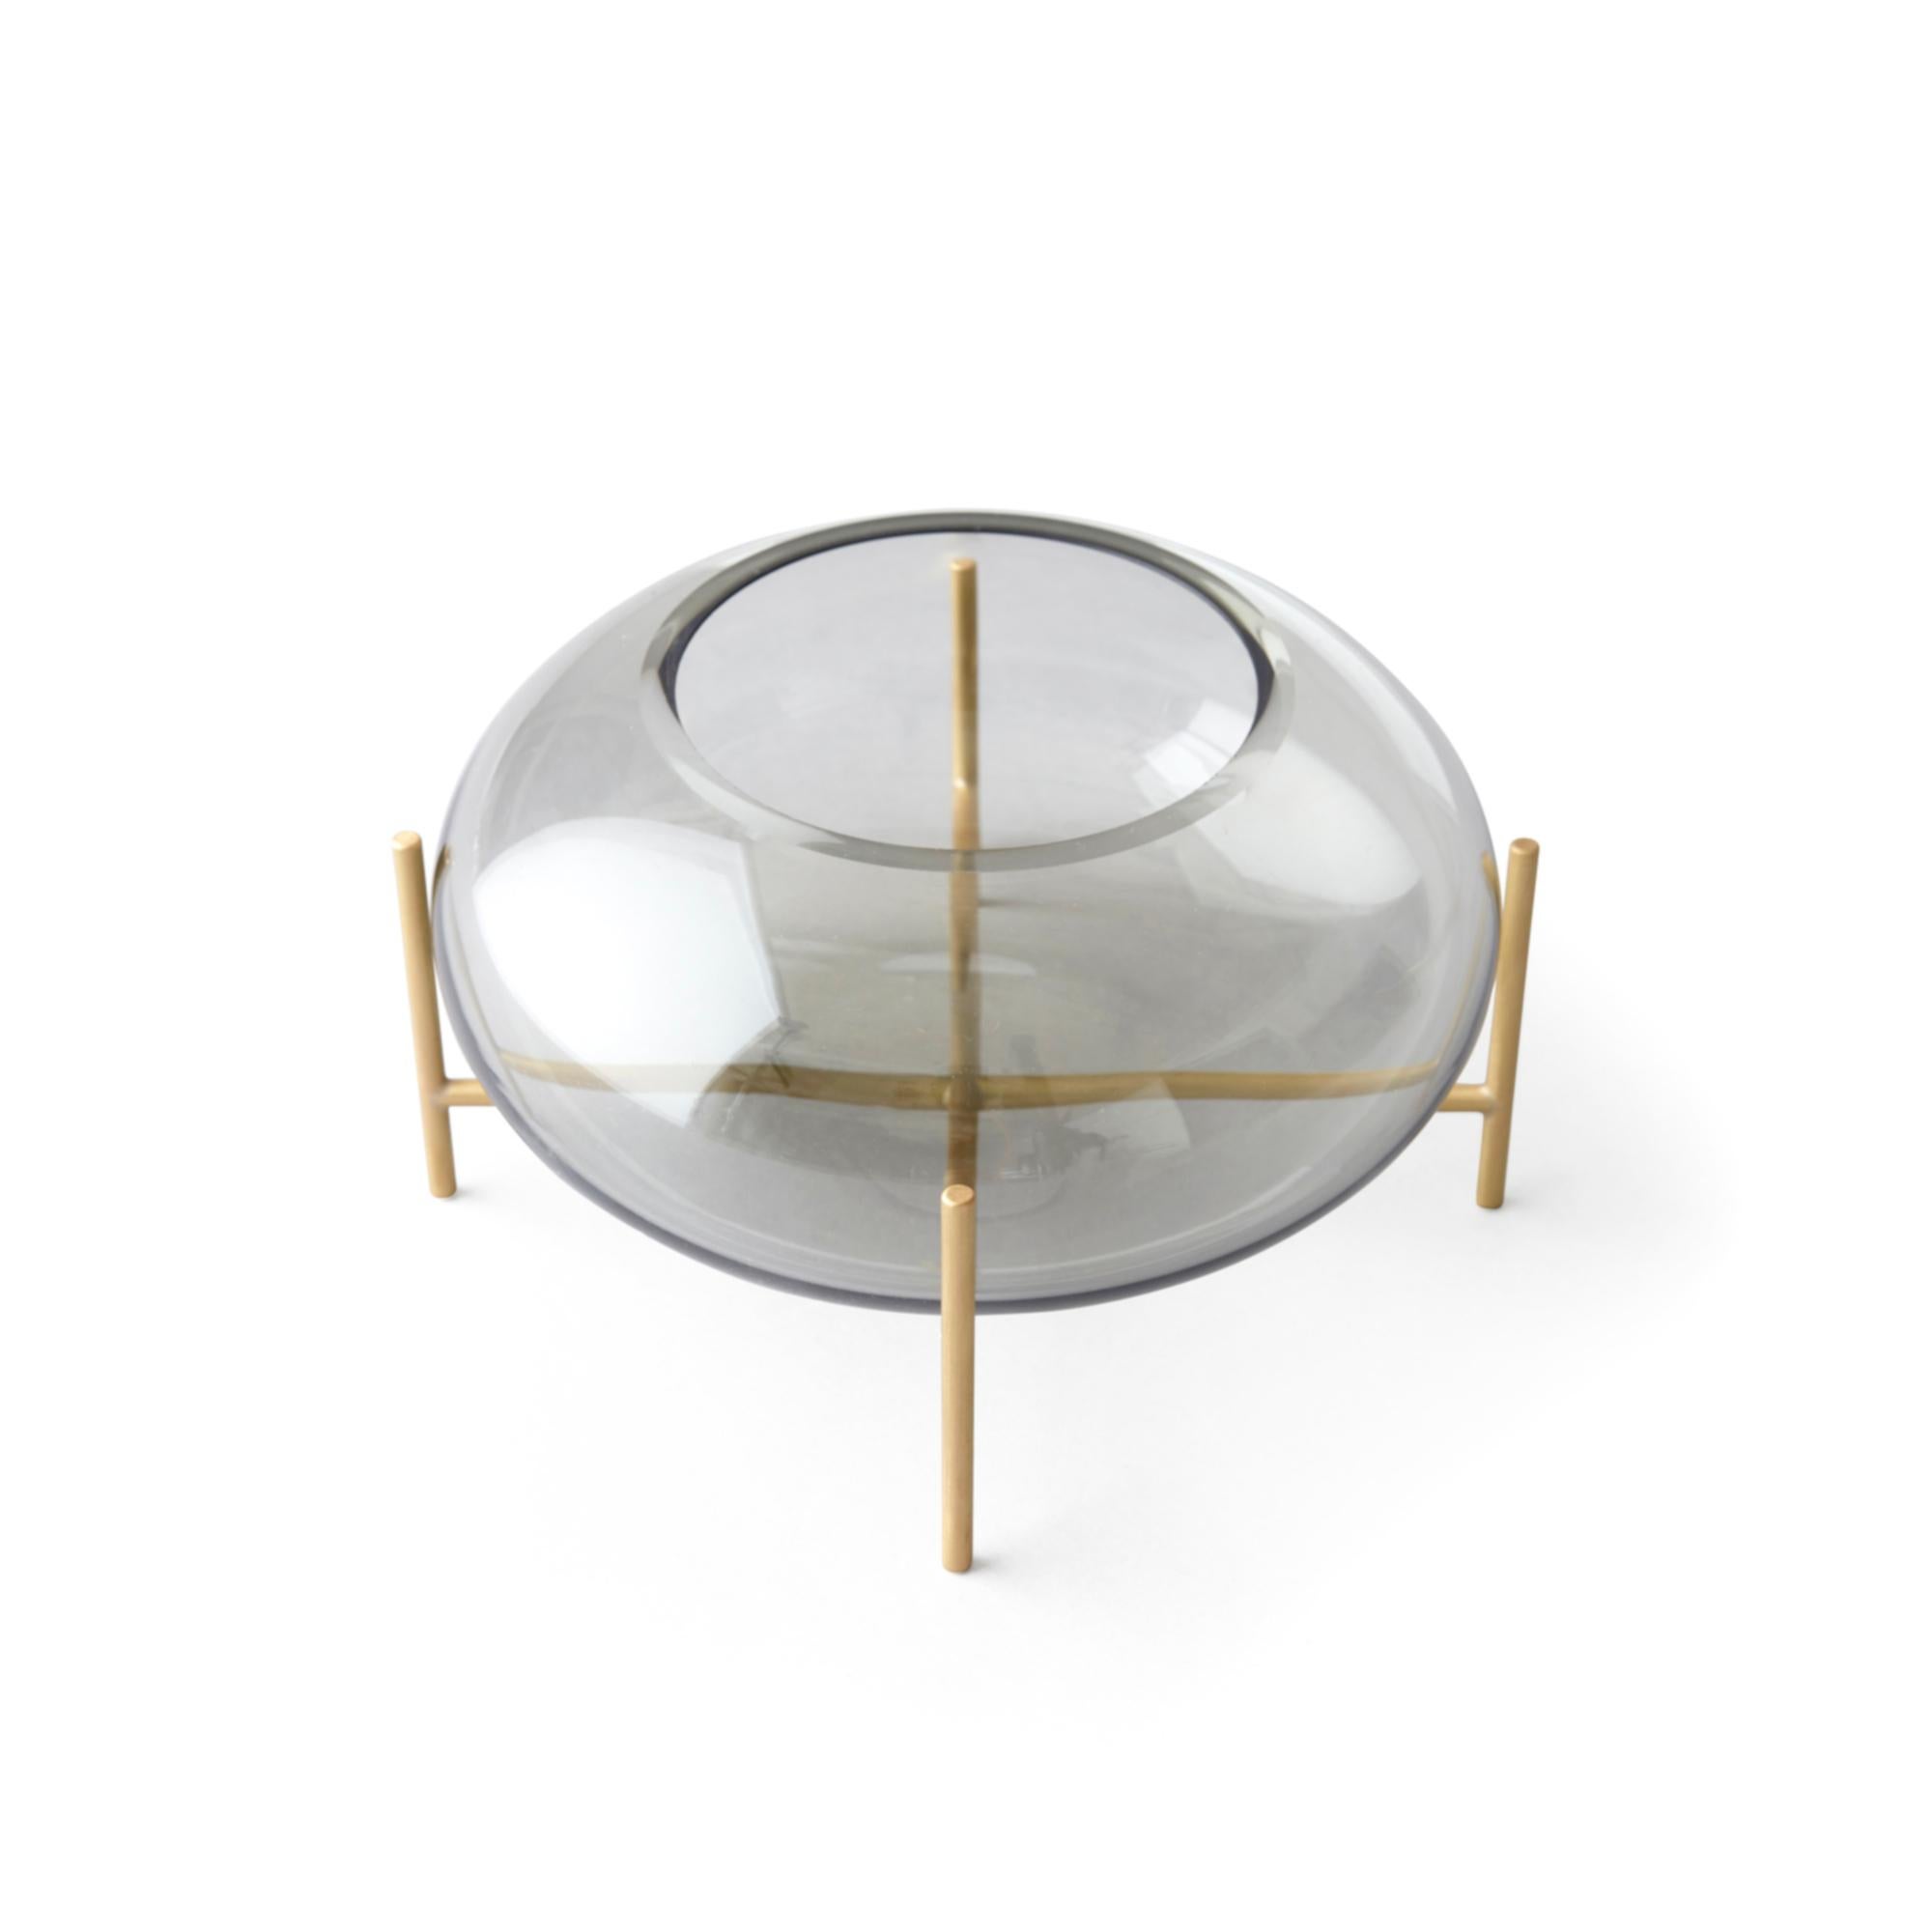 A new addition to the Echasse series by Theresa Arns for Menu, Echasse bowl combines the elegance of a traditional glass bowl with a playful and light expression, created by four slender brass legs that elevate it into the air. The word échasse is